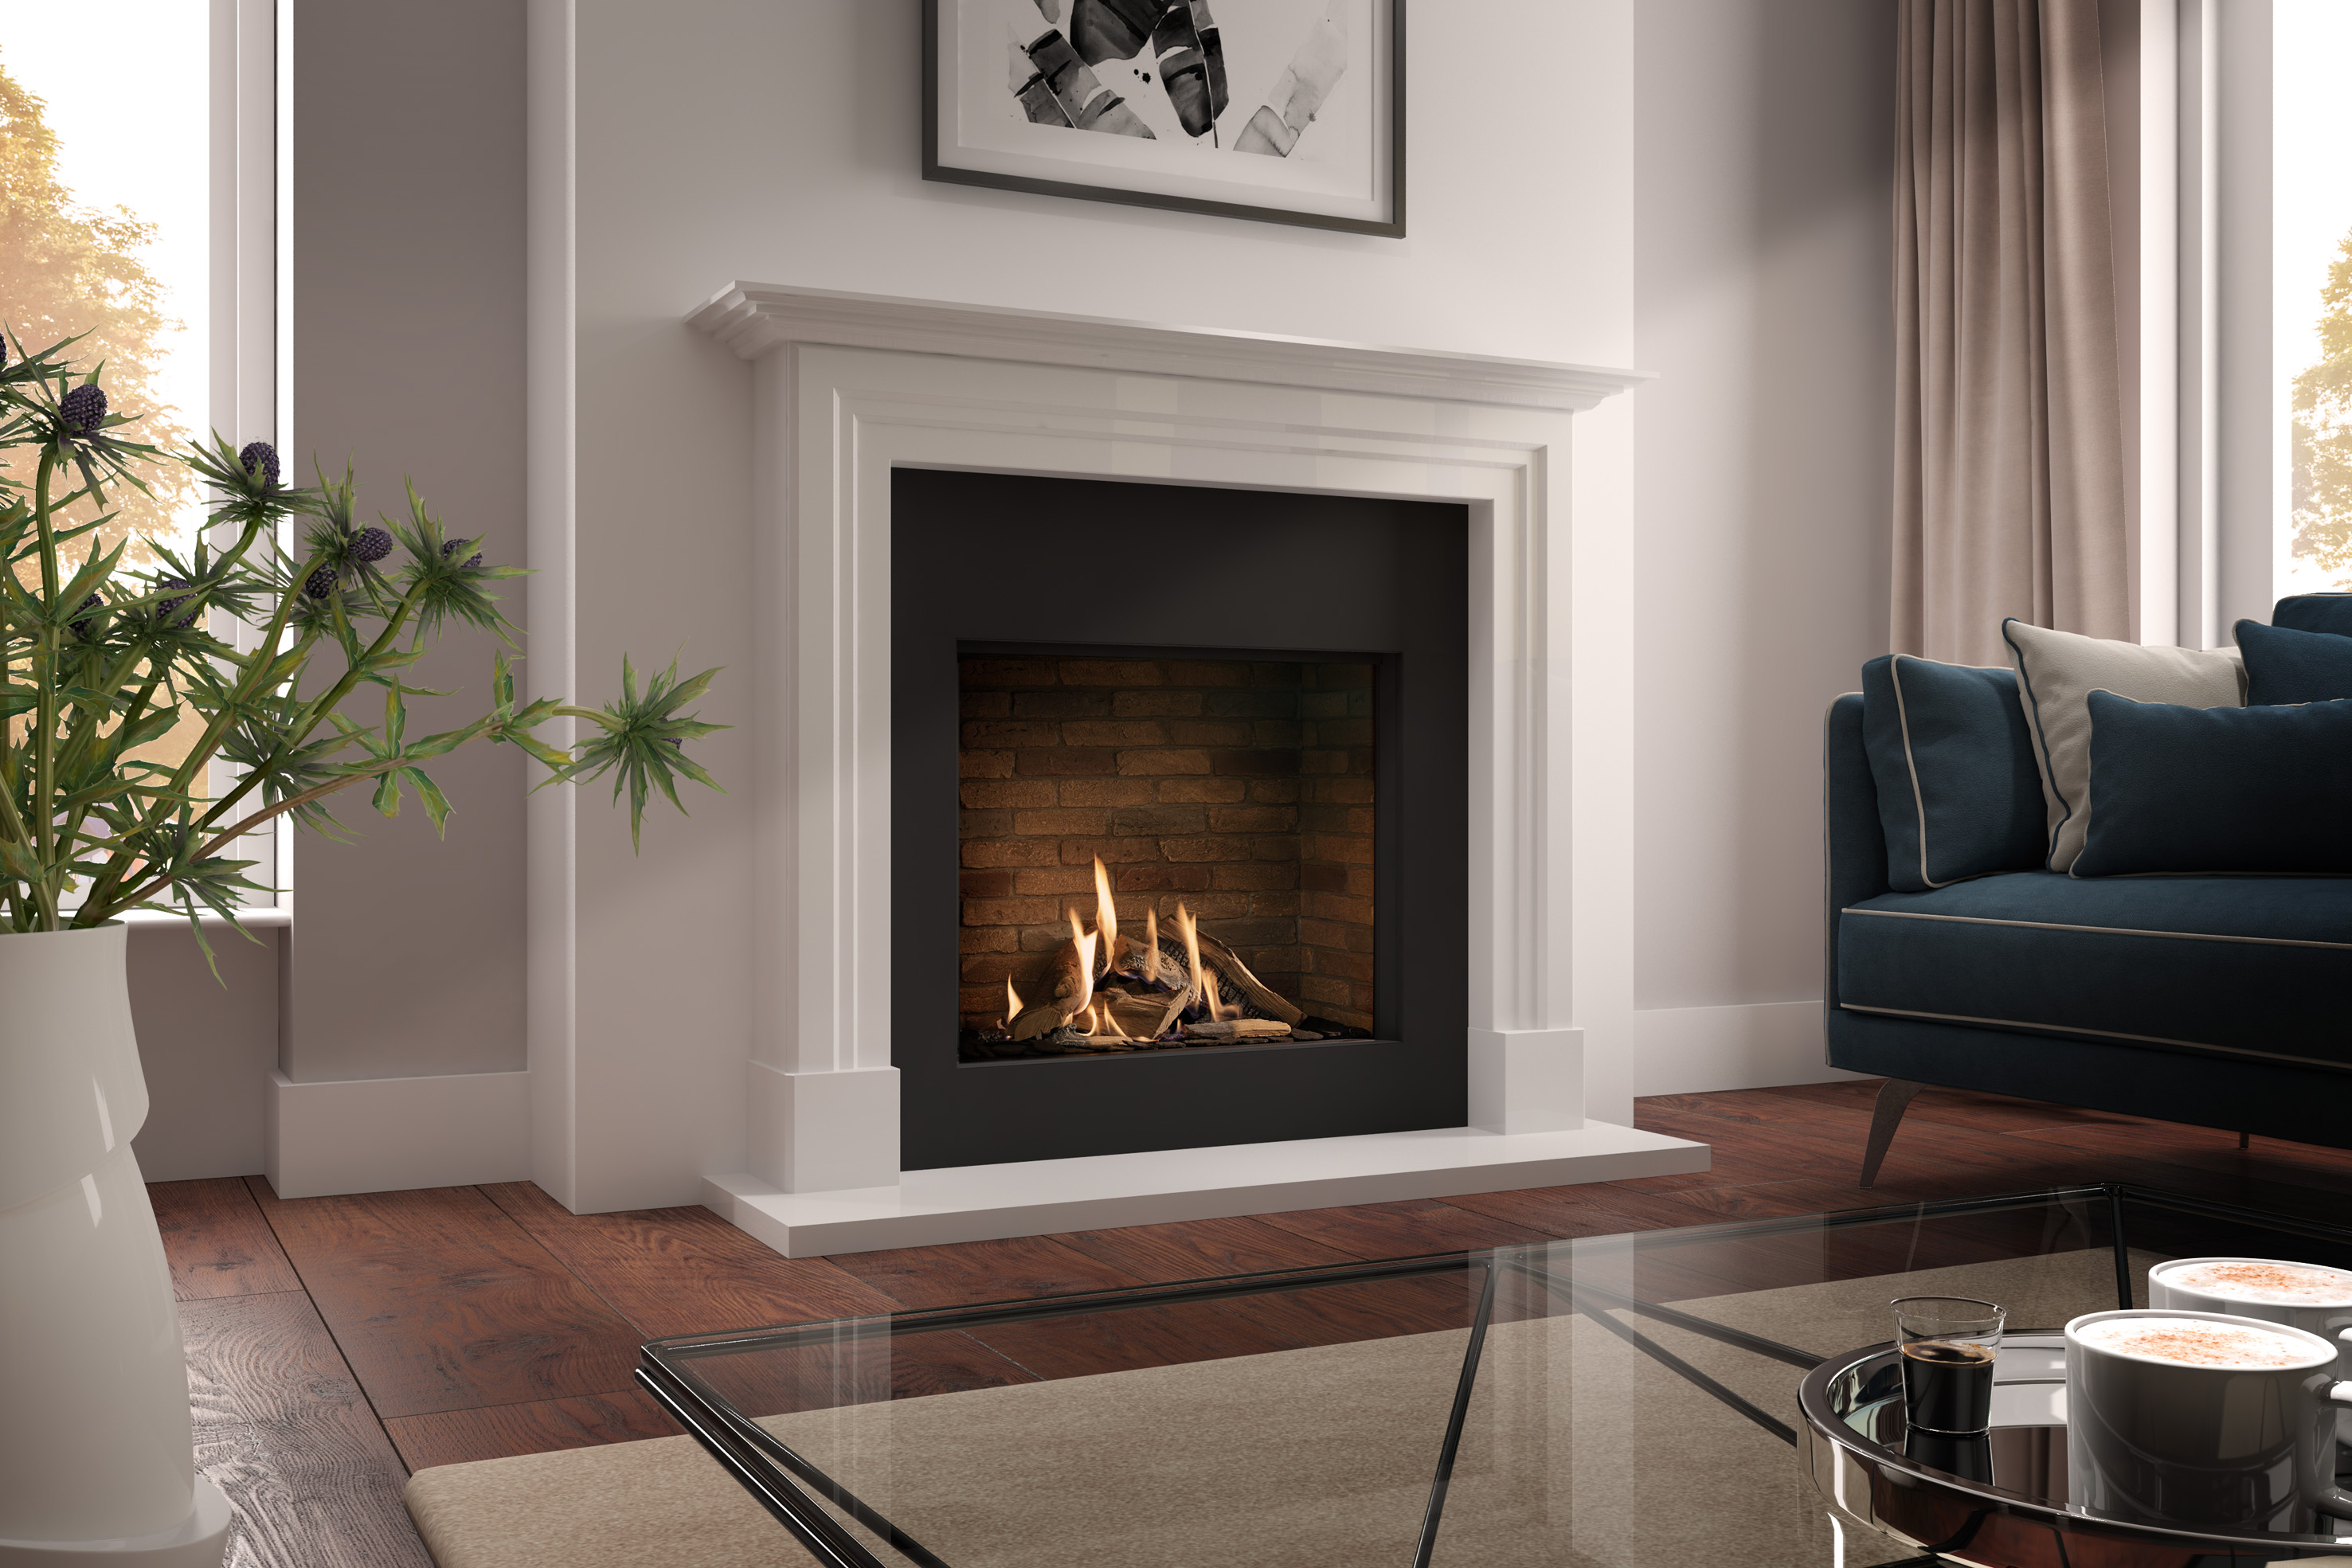 How to transform your fireplace this autumn – By Niall Deiraniya, general manager DRU Fires UK @Drugasar_UK